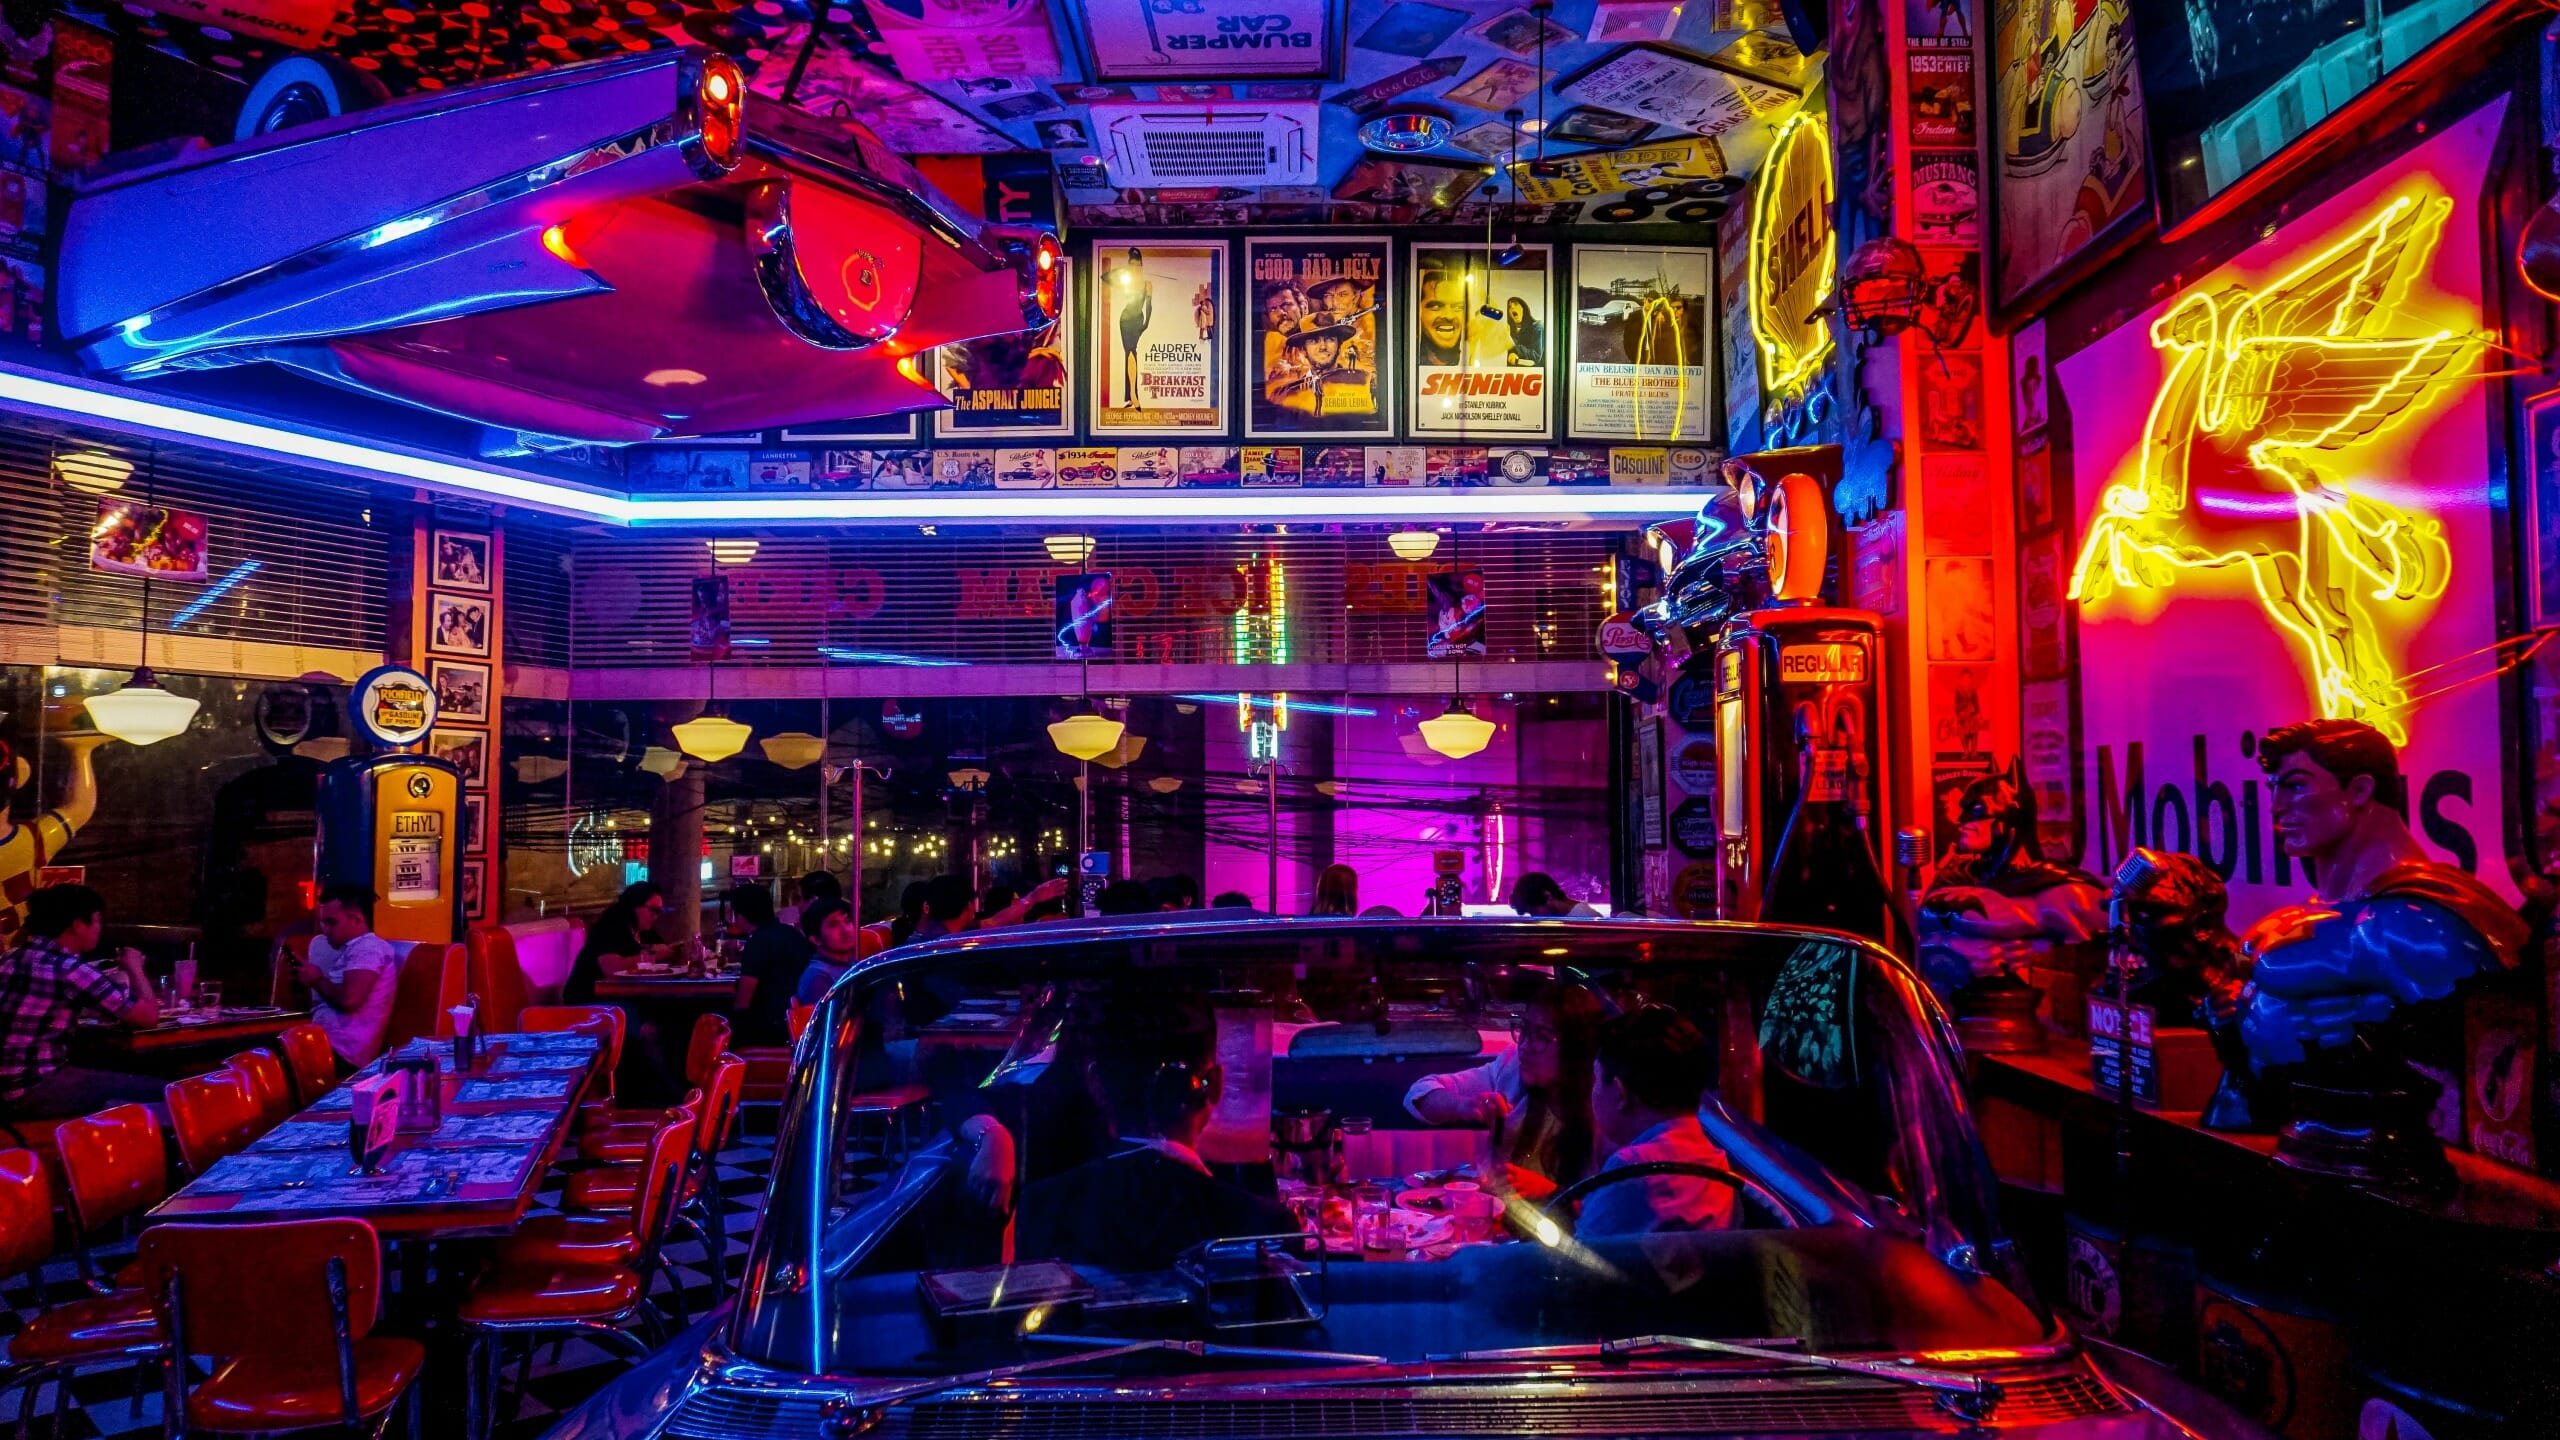 Night Life In UK – Neon Lights With Colorful Decoration for Young night